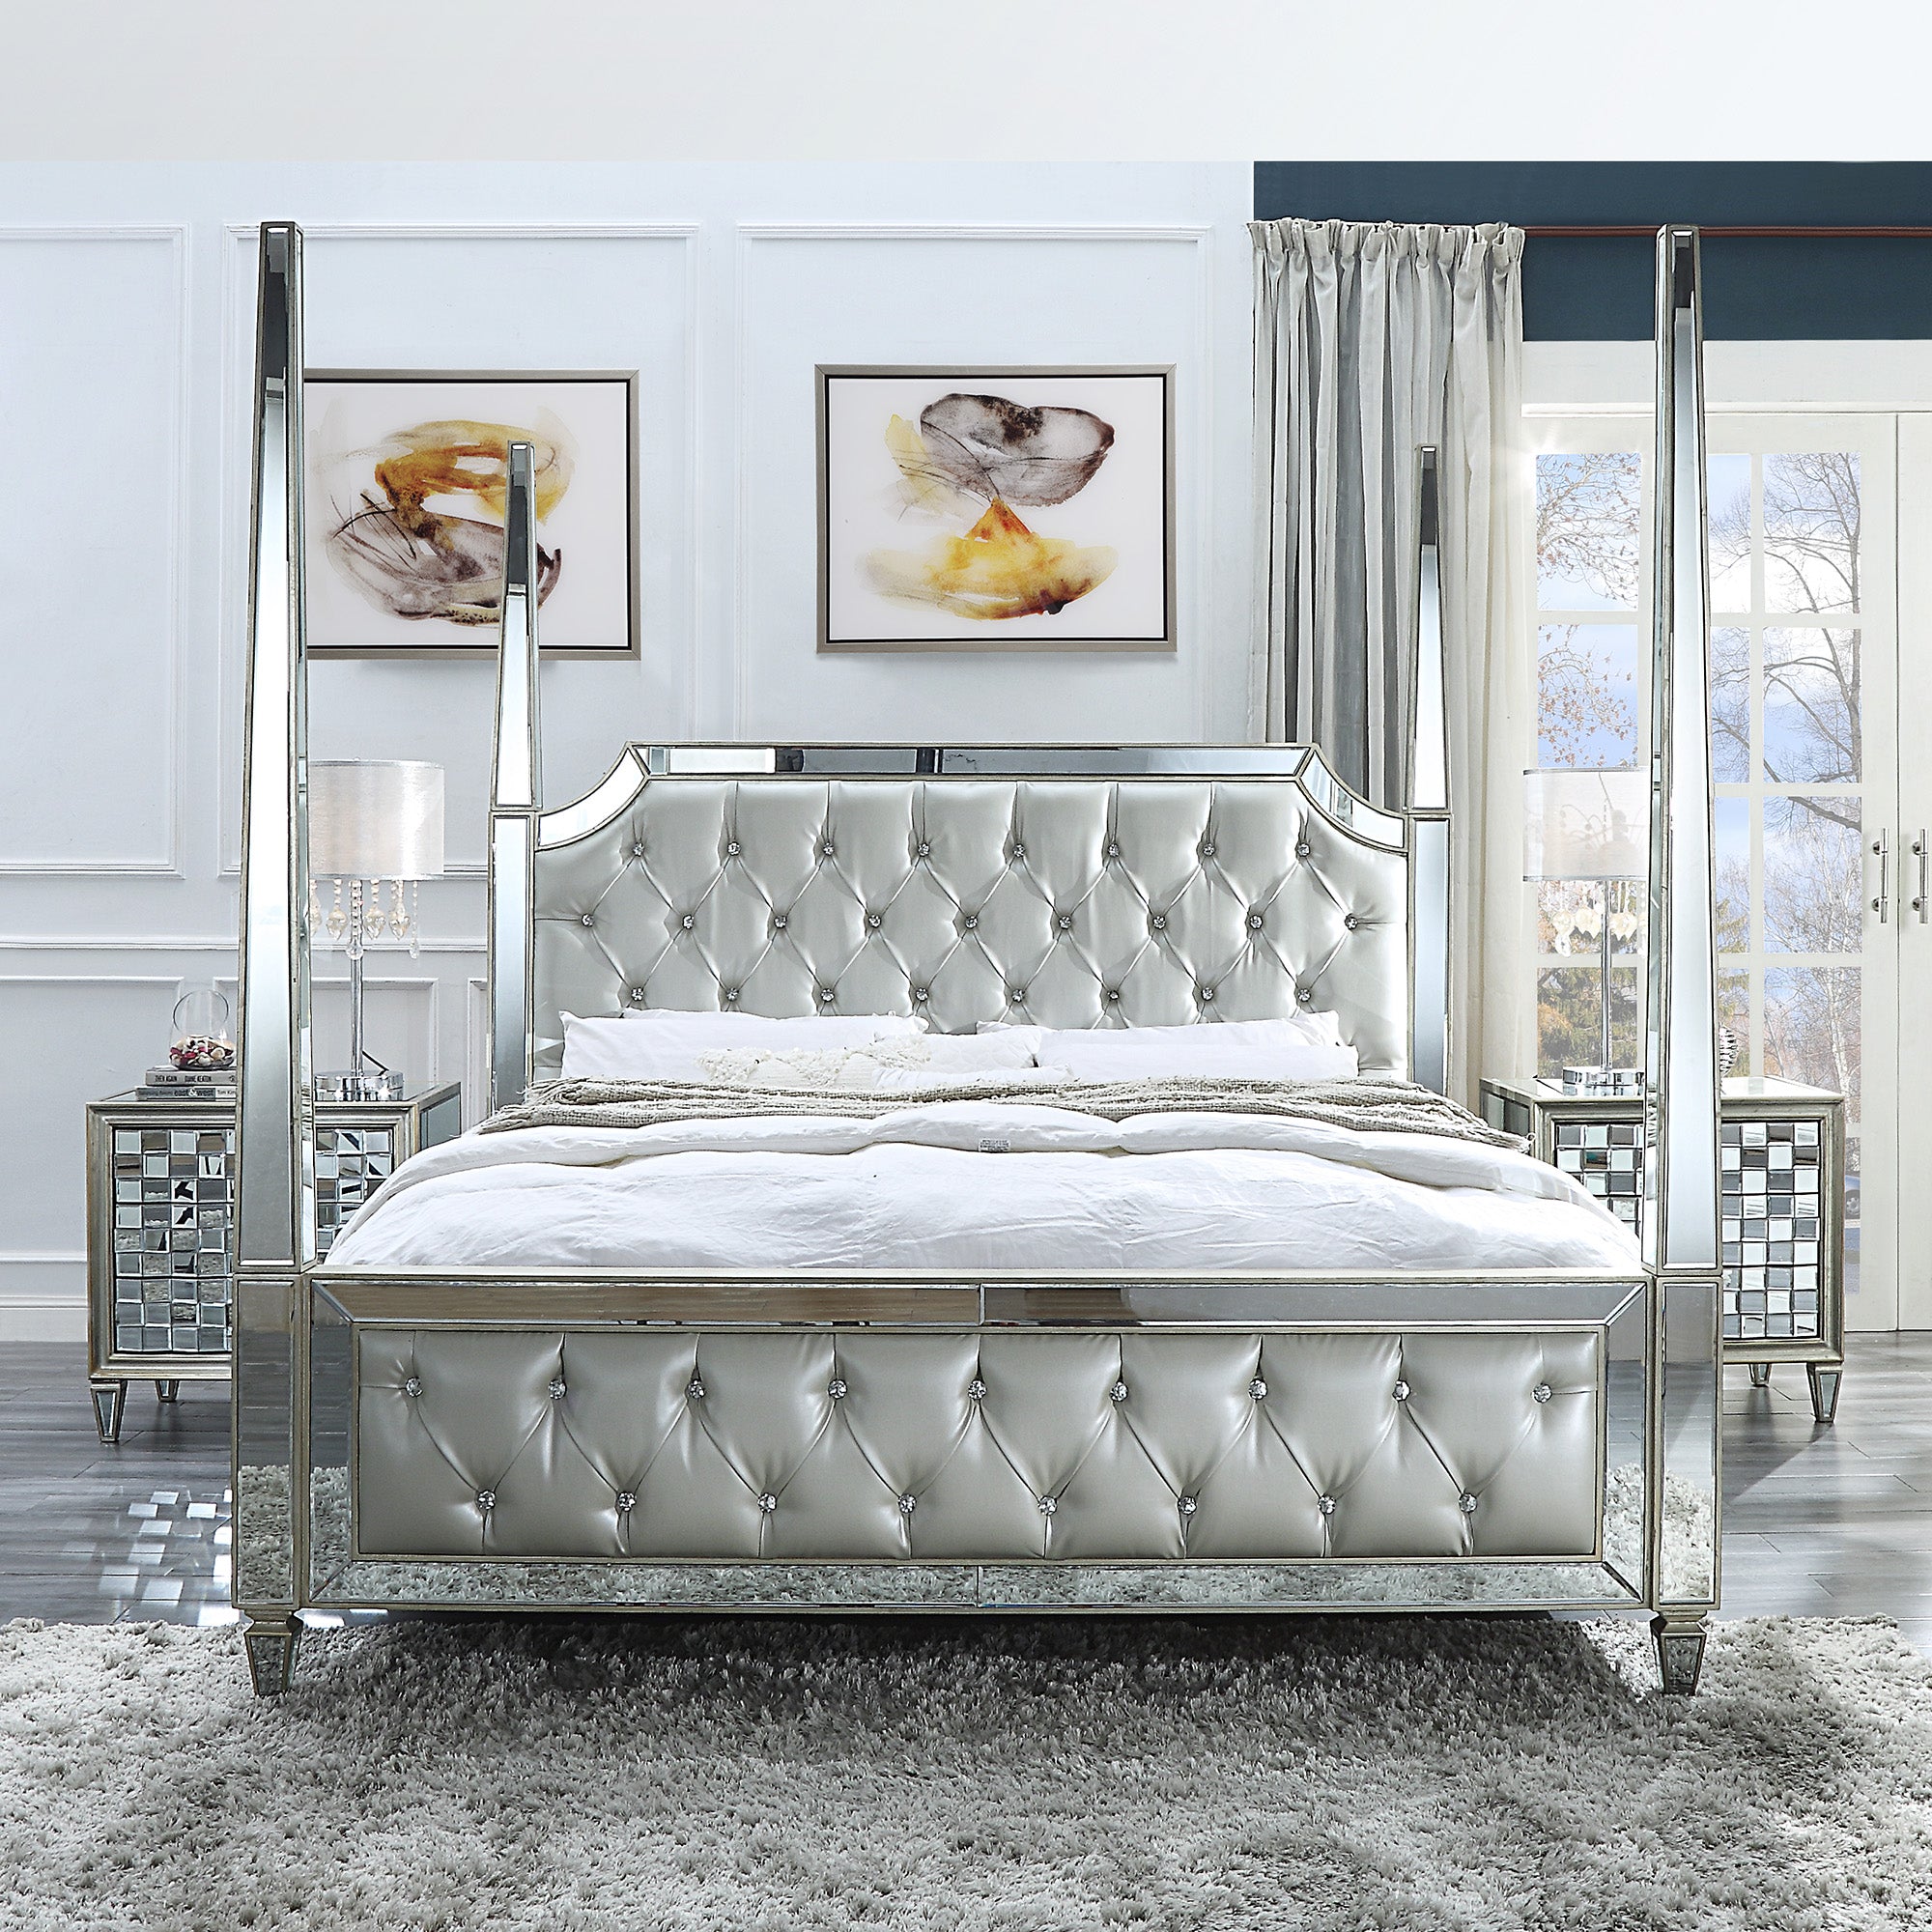 Homey Design HD-6001 - BED EASTERN KING - New Star Living